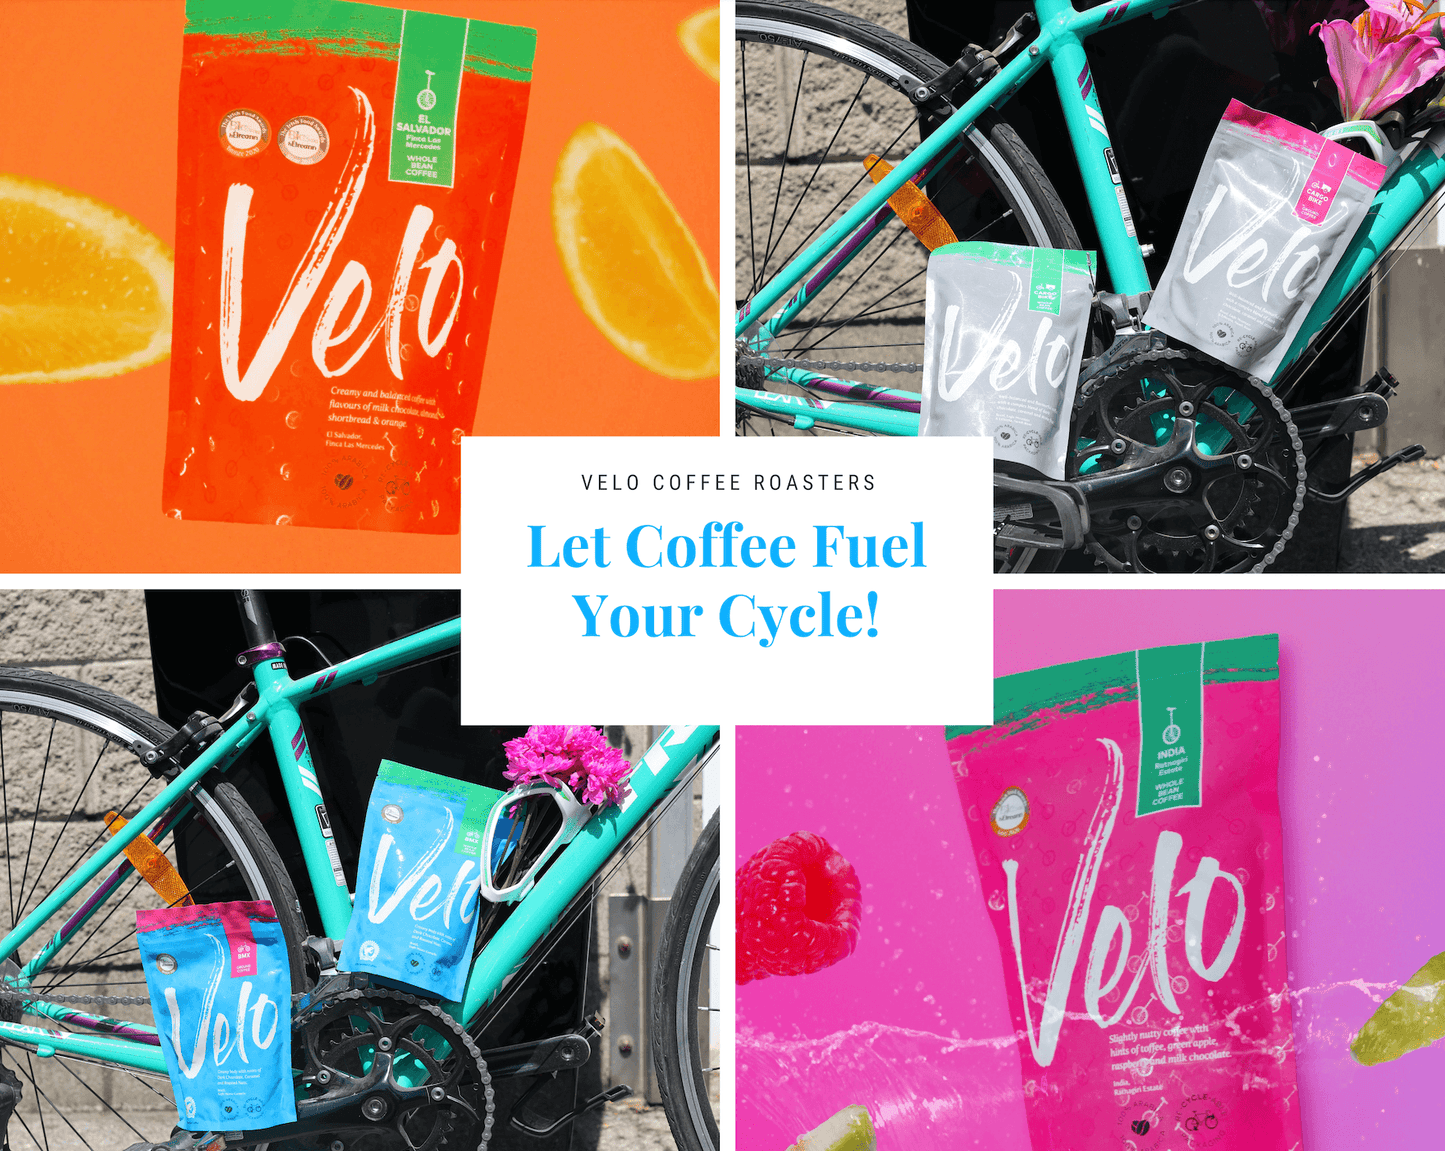 Let Coffee Fuel Your Cycle! - Velo Coffee Roasters